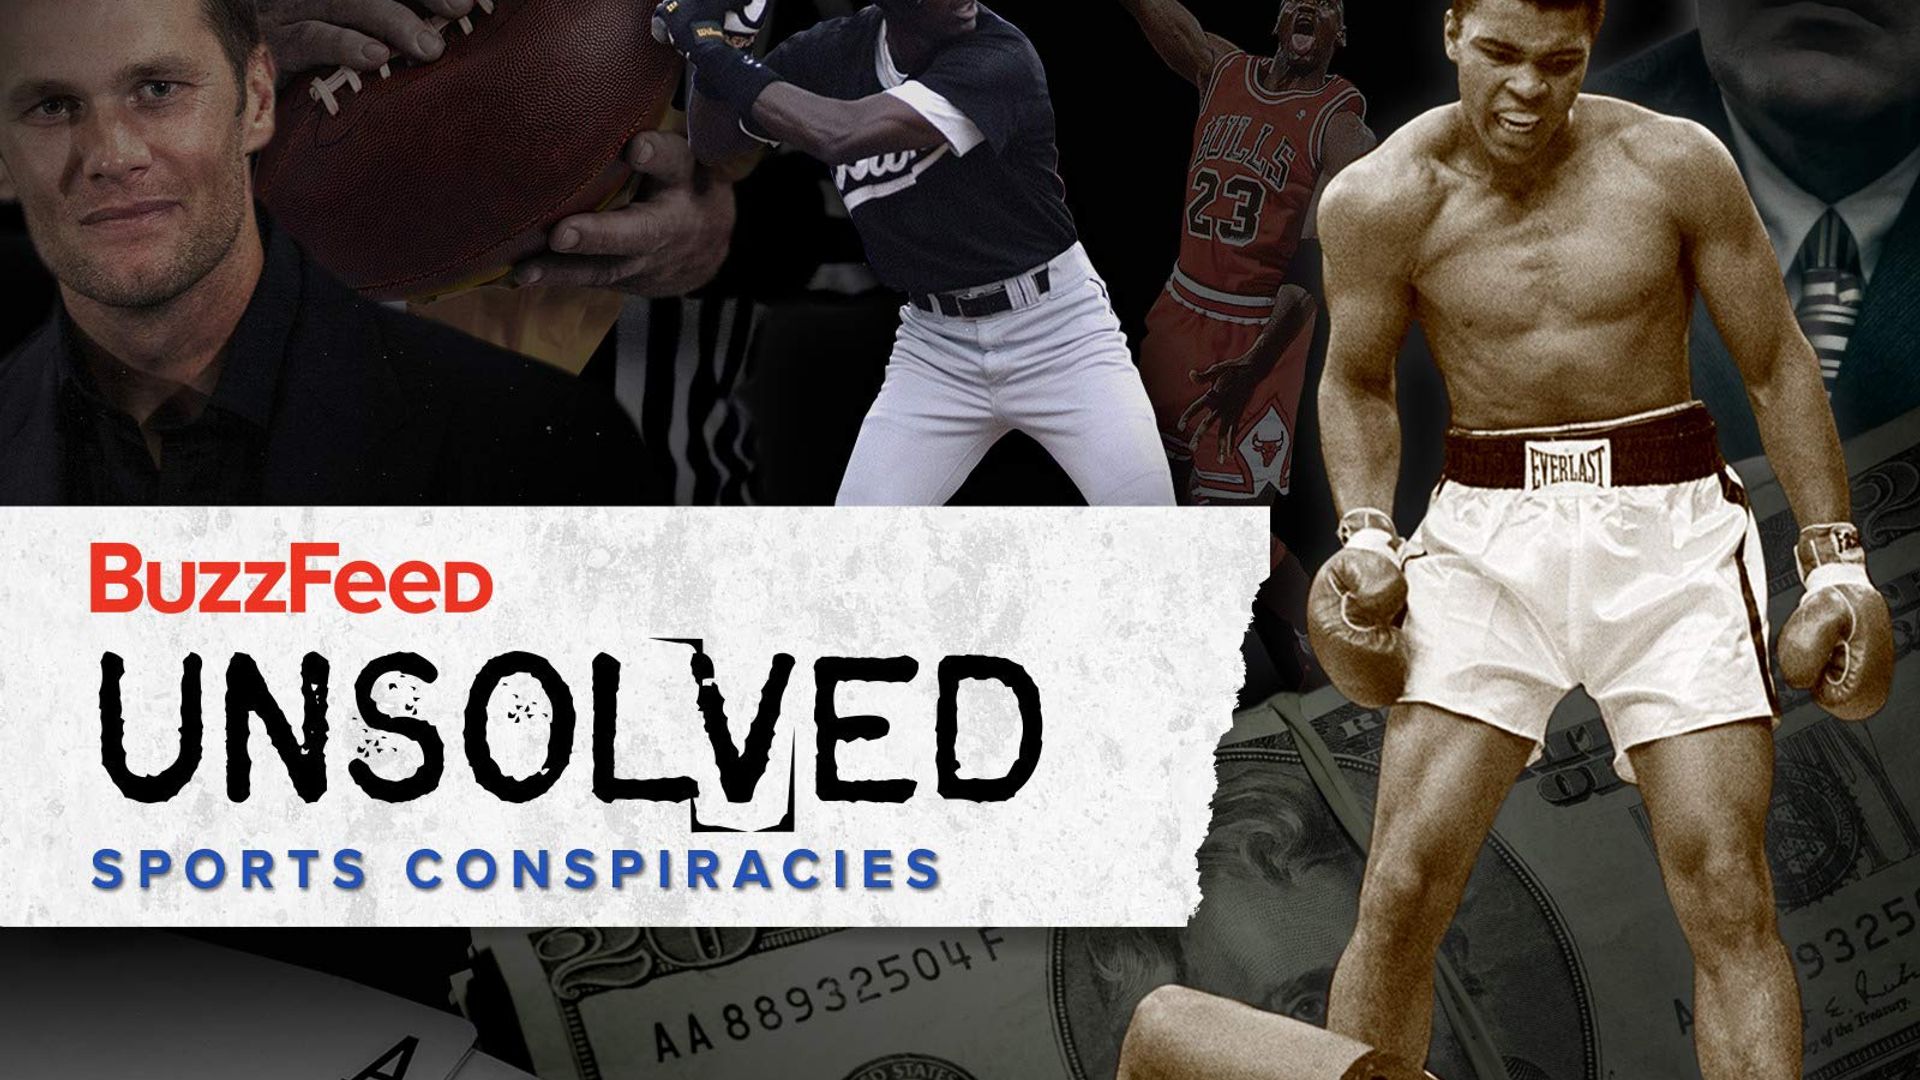 BuzzFeed Unsolved: Sports Conspiracies background